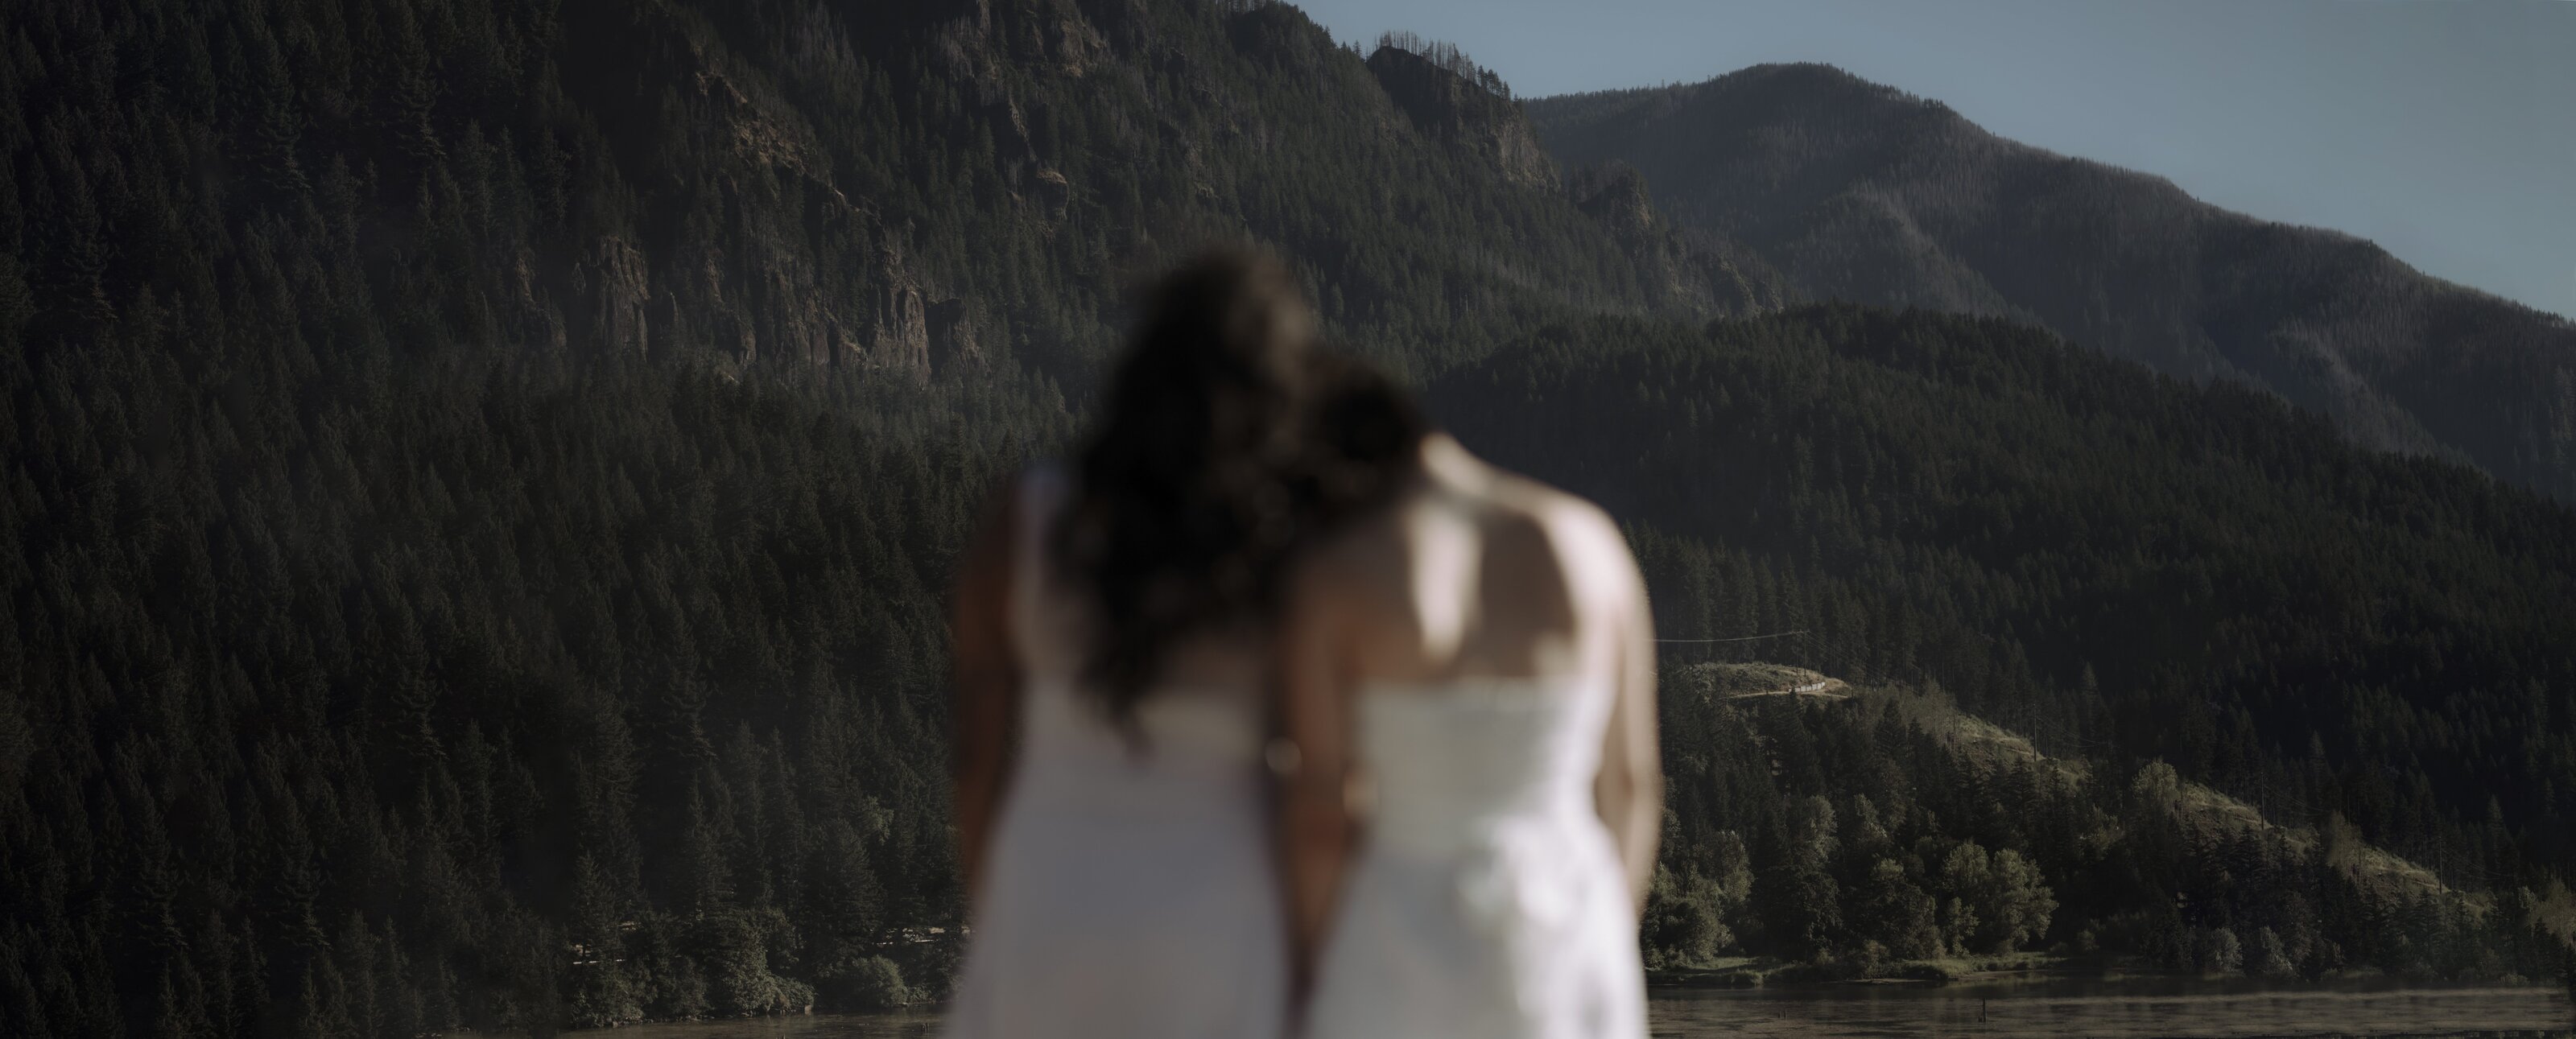 Lesbians eloping in the mountains